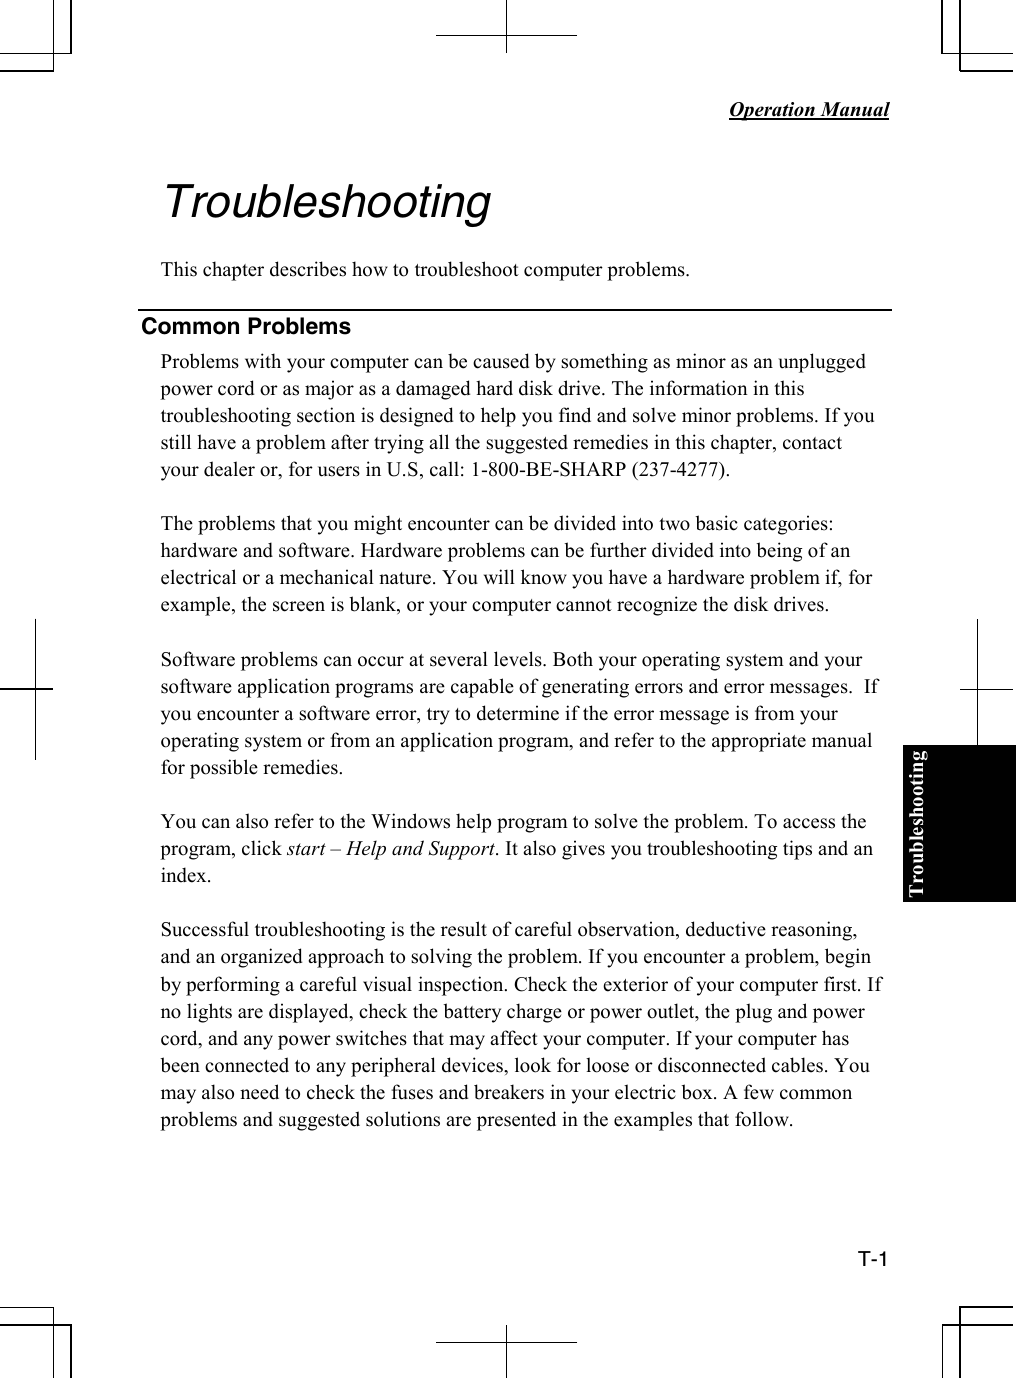 Troubleshooting   Operation Manual  T-1    Troubleshooting  This chapter describes how to troubleshoot computer problems.  Common Problems Problems with your computer can be caused by something as minor as an unplugged power cord or as major as a damaged hard disk drive. The information in this troubleshooting section is designed to help you find and solve minor problems. If you still have a problem after trying all the suggested remedies in this chapter, contact your dealer or, for users in U.S, call: 1-800-BE-SHARP (237-4277).  The problems that you might encounter can be divided into two basic categories: hardware and software. Hardware problems can be further divided into being of an electrical or a mechanical nature. You will know you have a hardware problem if, for example, the screen is blank, or your computer cannot recognize the disk drives.  Software problems can occur at several levels. Both your operating system and your software application programs are capable of generating errors and error messages.  If you encounter a software error, try to determine if the error message is from your operating system or from an application program, and refer to the appropriate manual for possible remedies.  You can also refer to the Windows help program to solve the problem. To access the program, click start – Help and Support. It also gives you troubleshooting tips and an index.  Successful troubleshooting is the result of careful observation, deductive reasoning, and an organized approach to solving the problem. If you encounter a problem, begin by performing a careful visual inspection. Check the exterior of your computer first. If no lights are displayed, check the battery charge or power outlet, the plug and power cord, and any power switches that may affect your computer. If your computer has been connected to any peripheral devices, look for loose or disconnected cables. You may also need to check the fuses and breakers in your electric box. A few common problems and suggested solutions are presented in the examples that follow.  